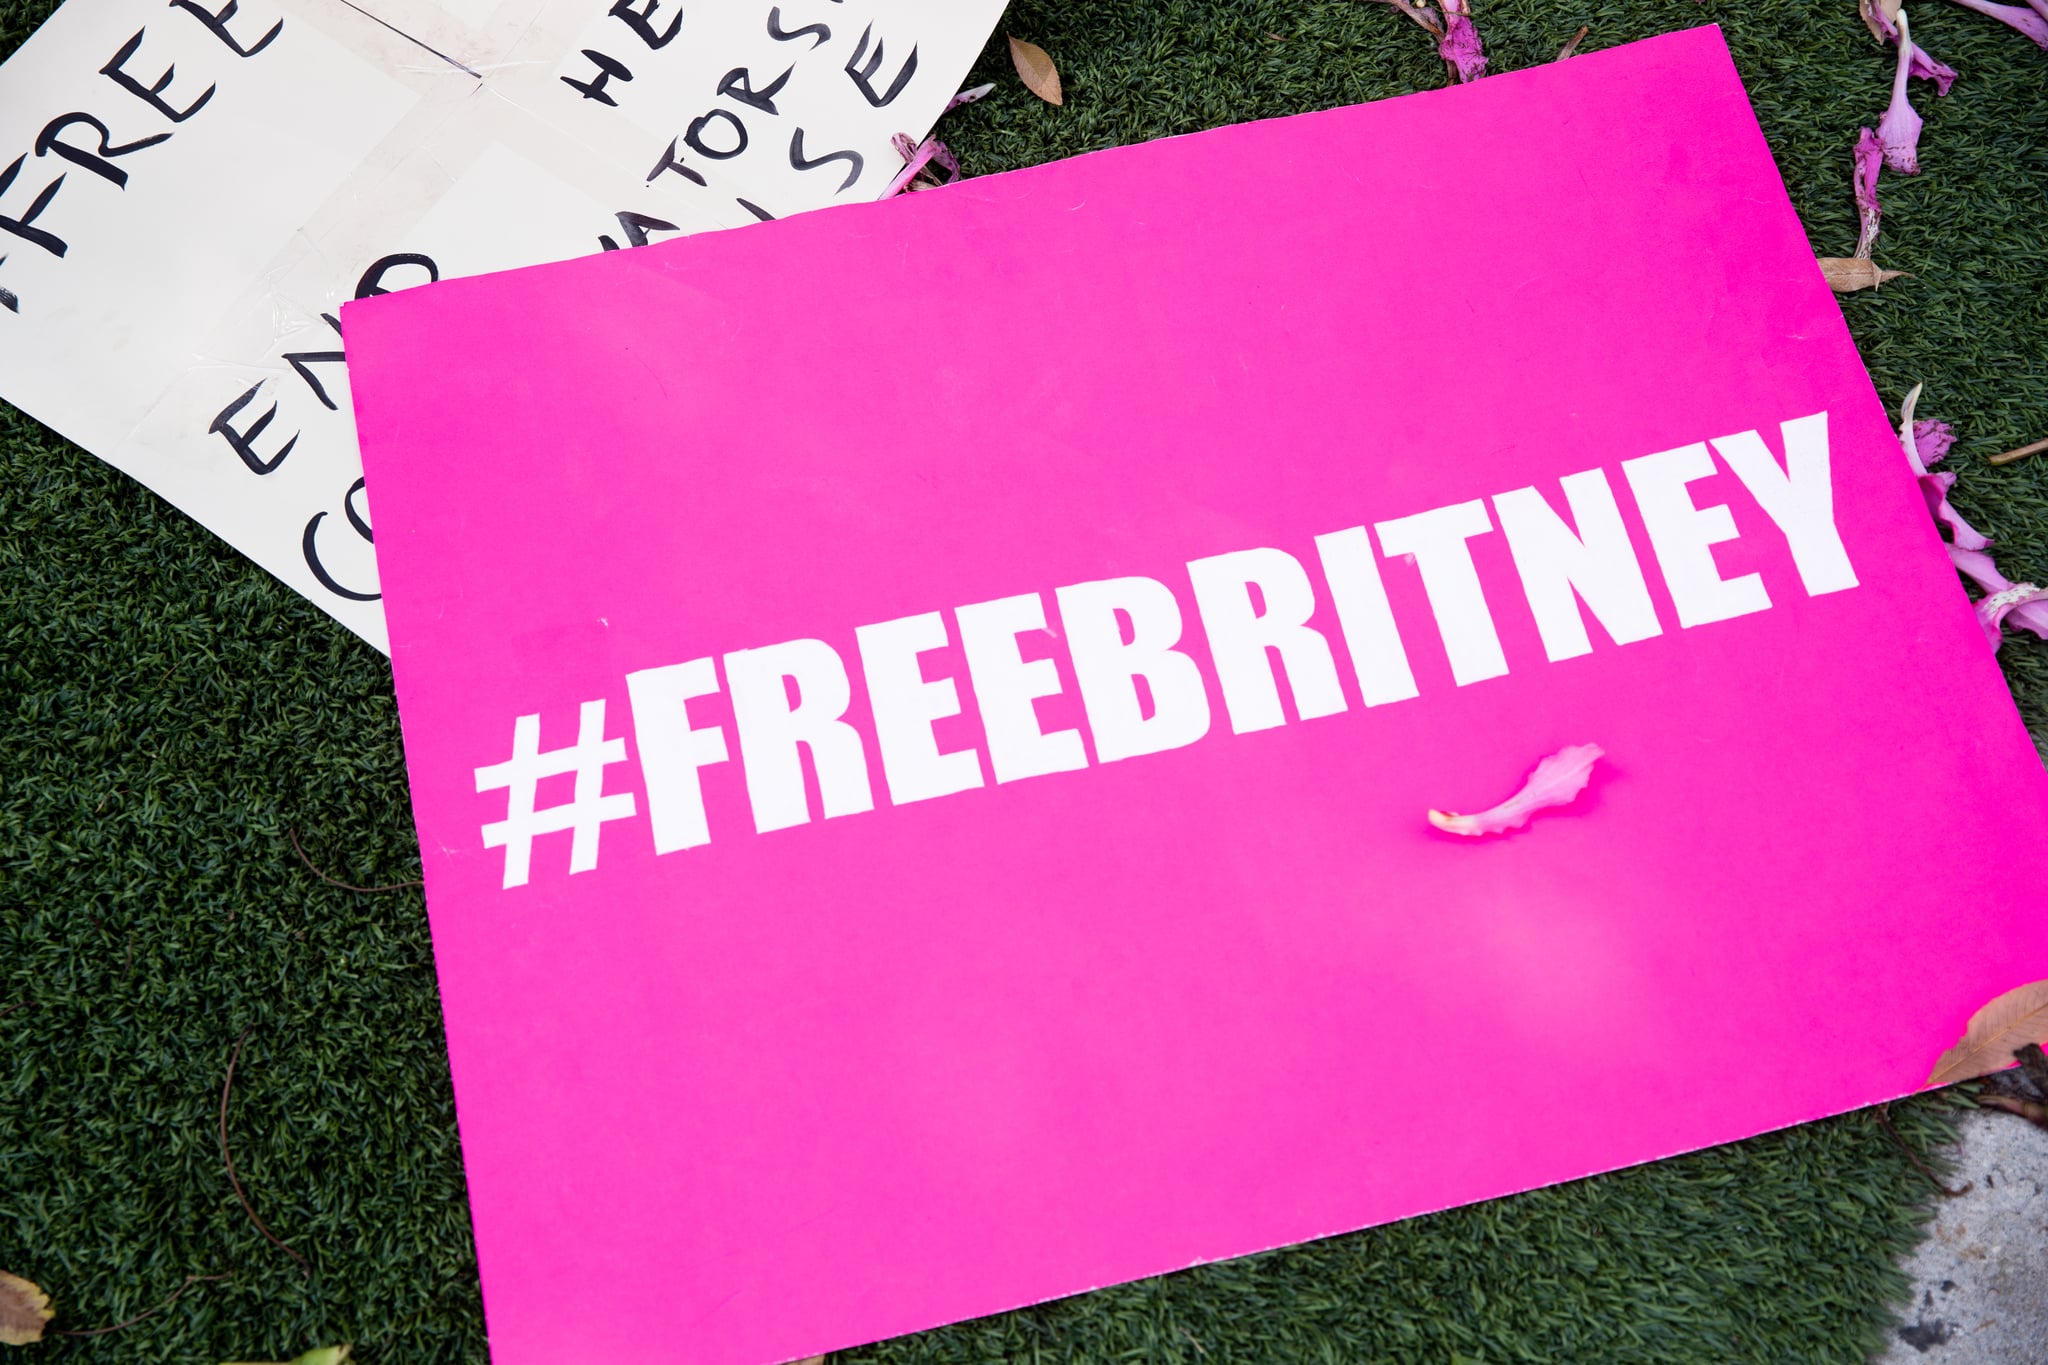 WEST HOLLYWOOD, CALIFORNIA - SEPTEMBER 15: Signs in support of Britney Spears are seen during a #FreeBritney protest outside of the Tri Star Sports & Entertainment Group offices on September 15, 2020 in West Hollywood, California. (Photo by Rich Fury/Getty Images)